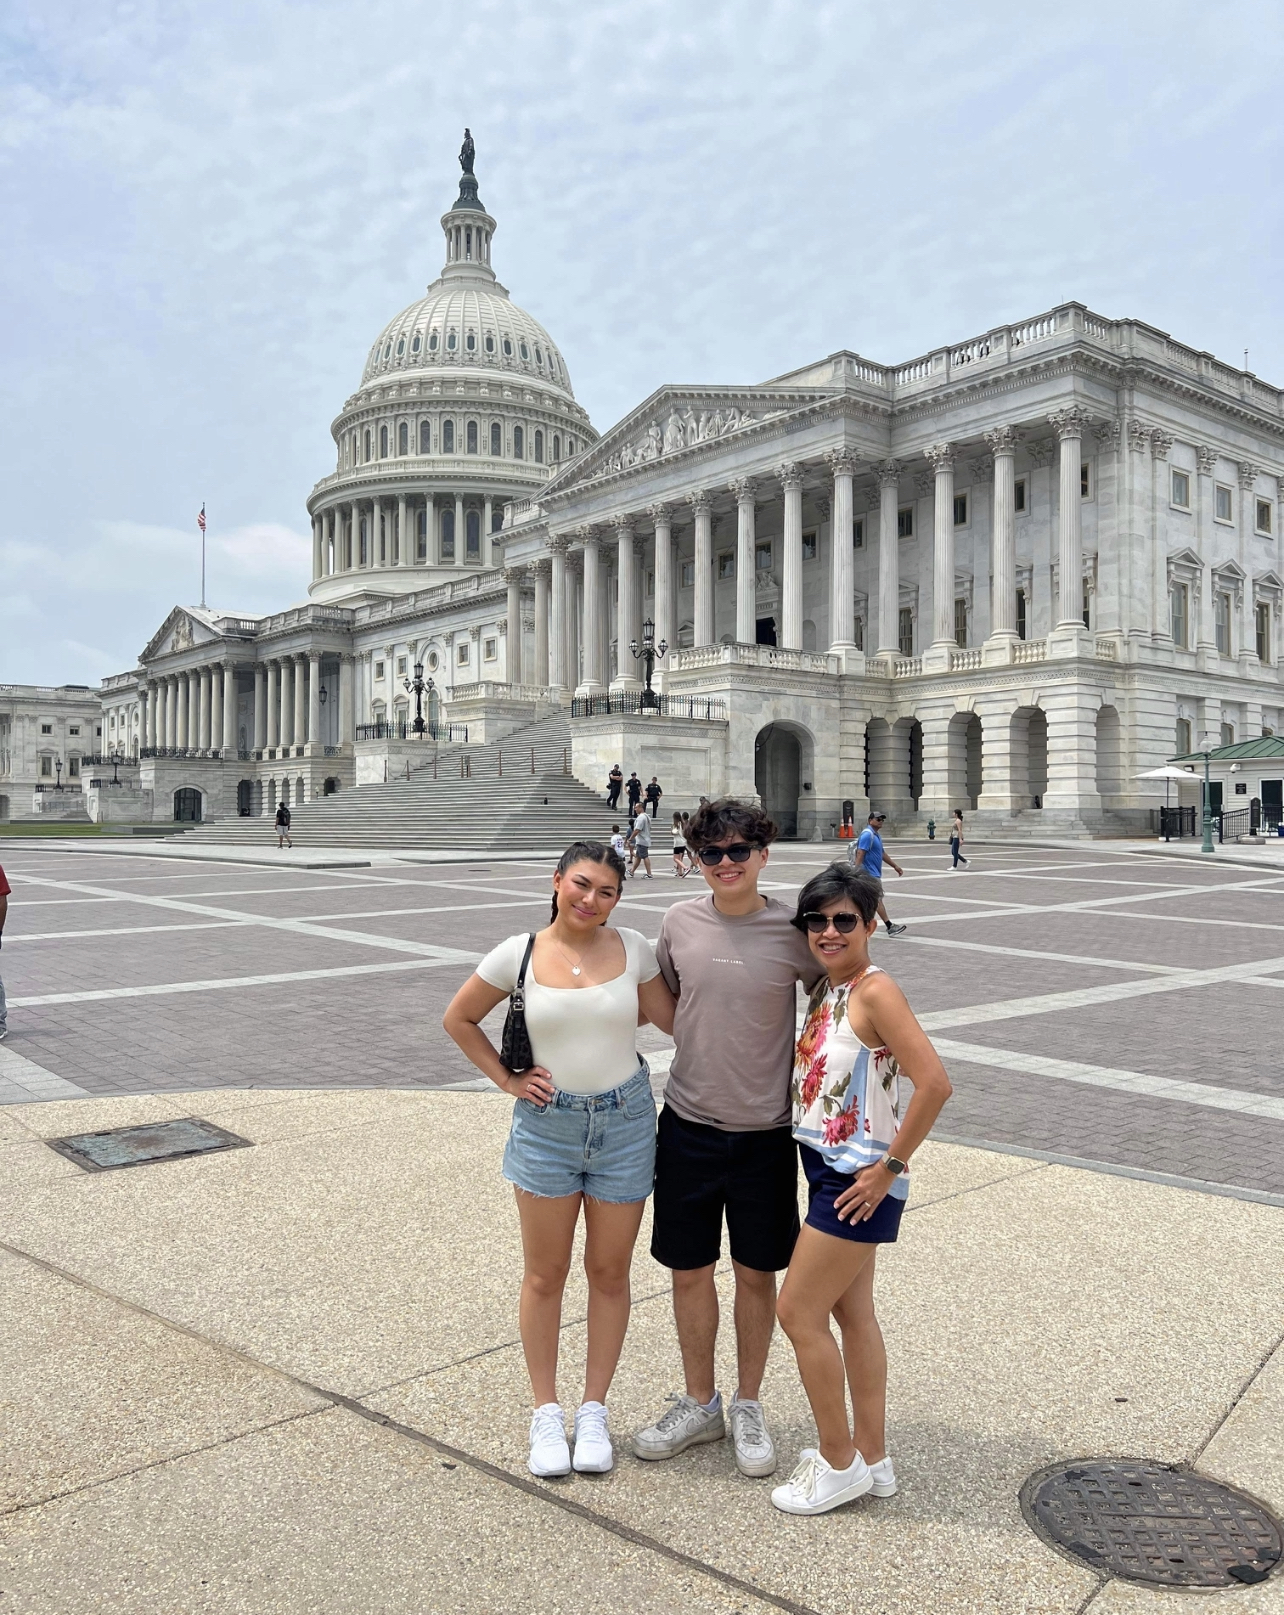 Joslyn (left), Joslyn's brother (middle), and Joslyn's mom (right) outside the US Capitol.